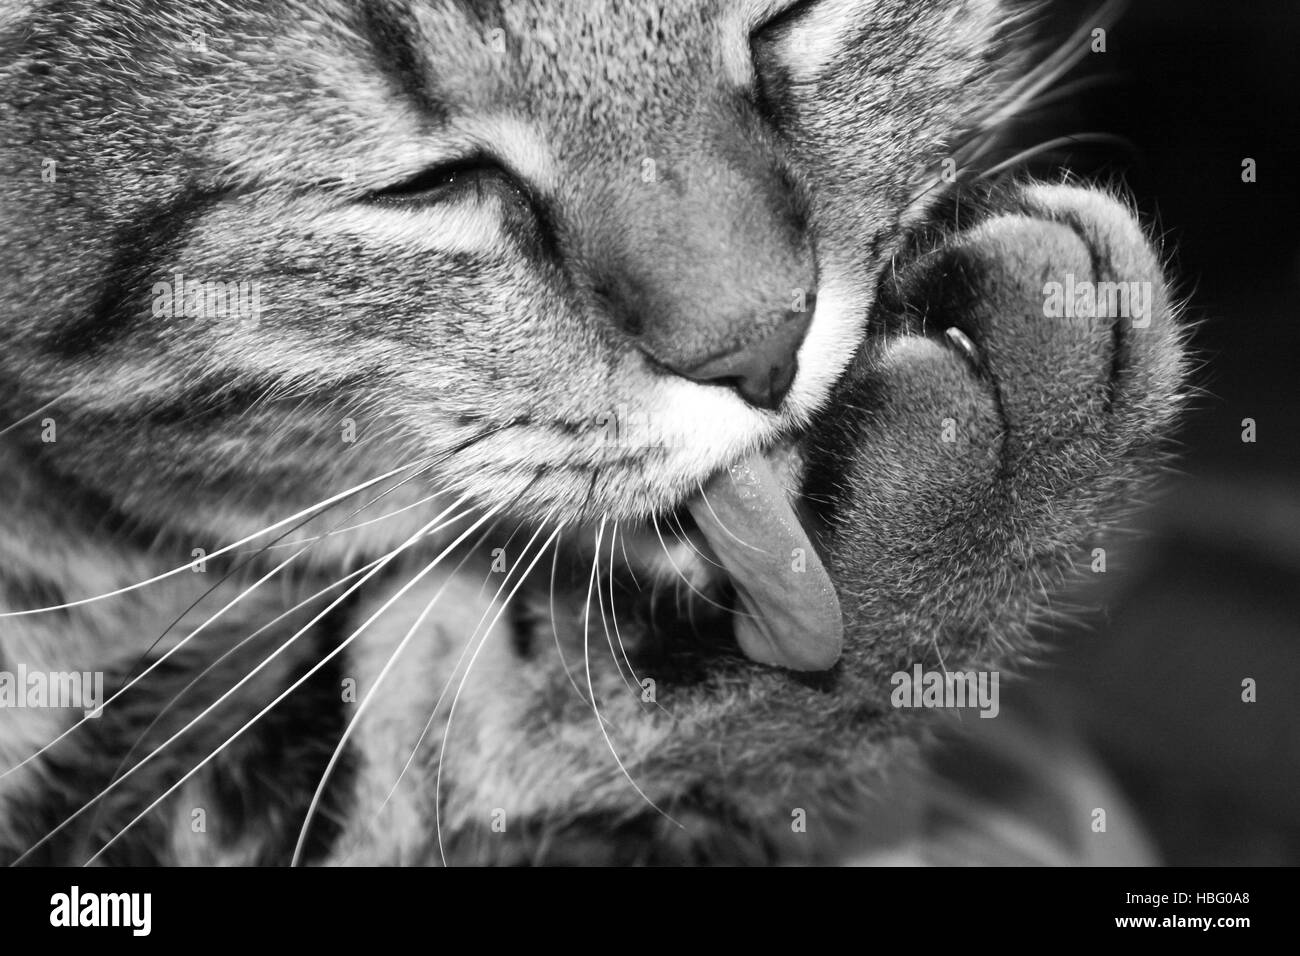 A cat licks their paw Stock Photo